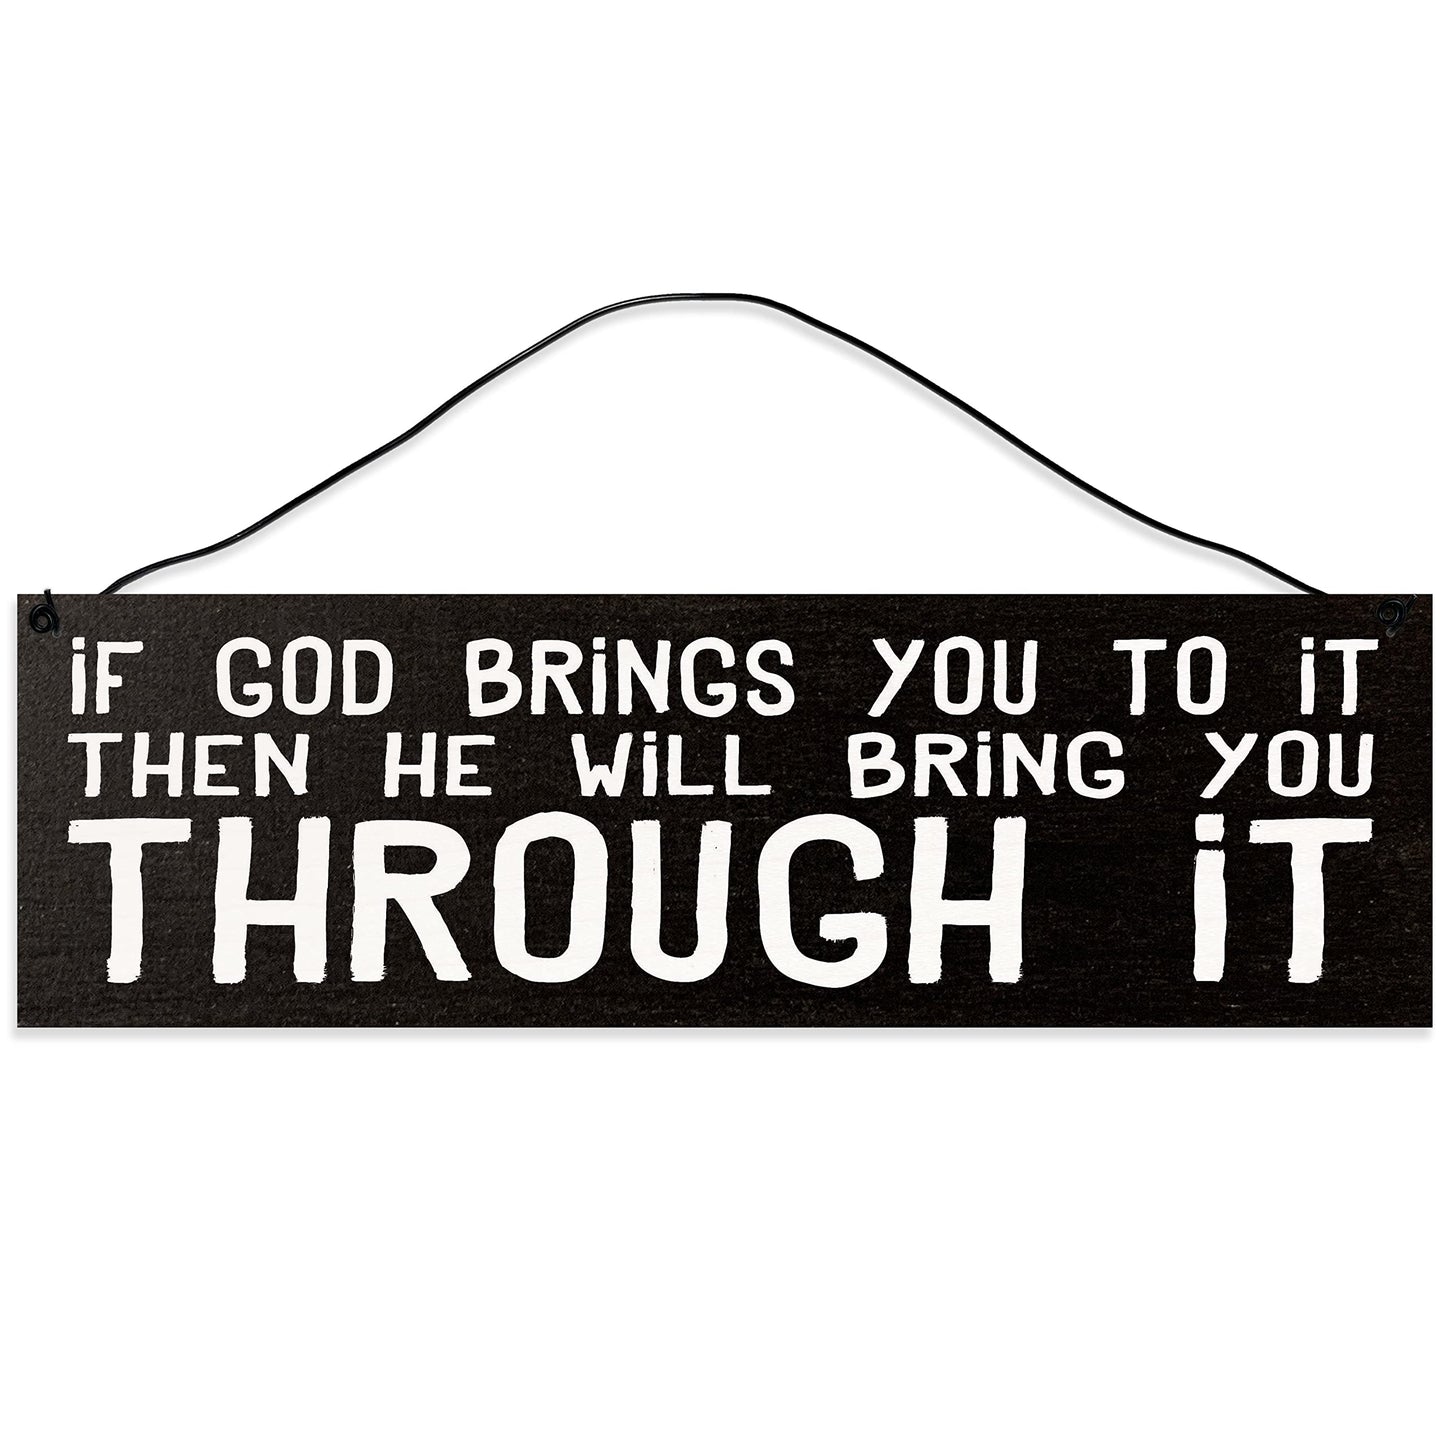 If God Brings You to it Then He Will Bring You Through it.